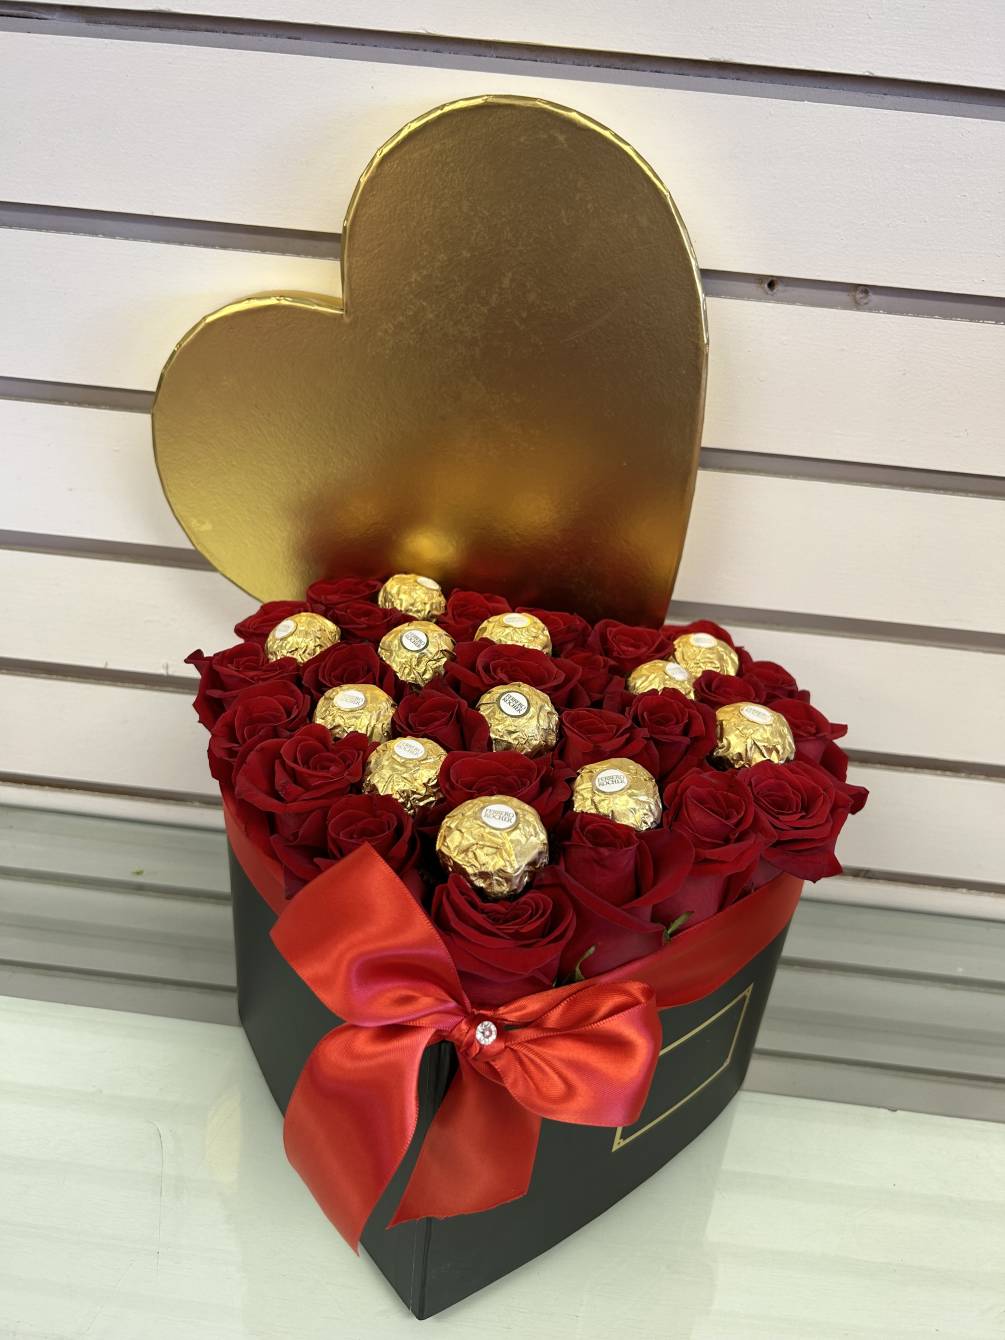 Our signature premium roses arranged in a heart-shaped box with chocolates.